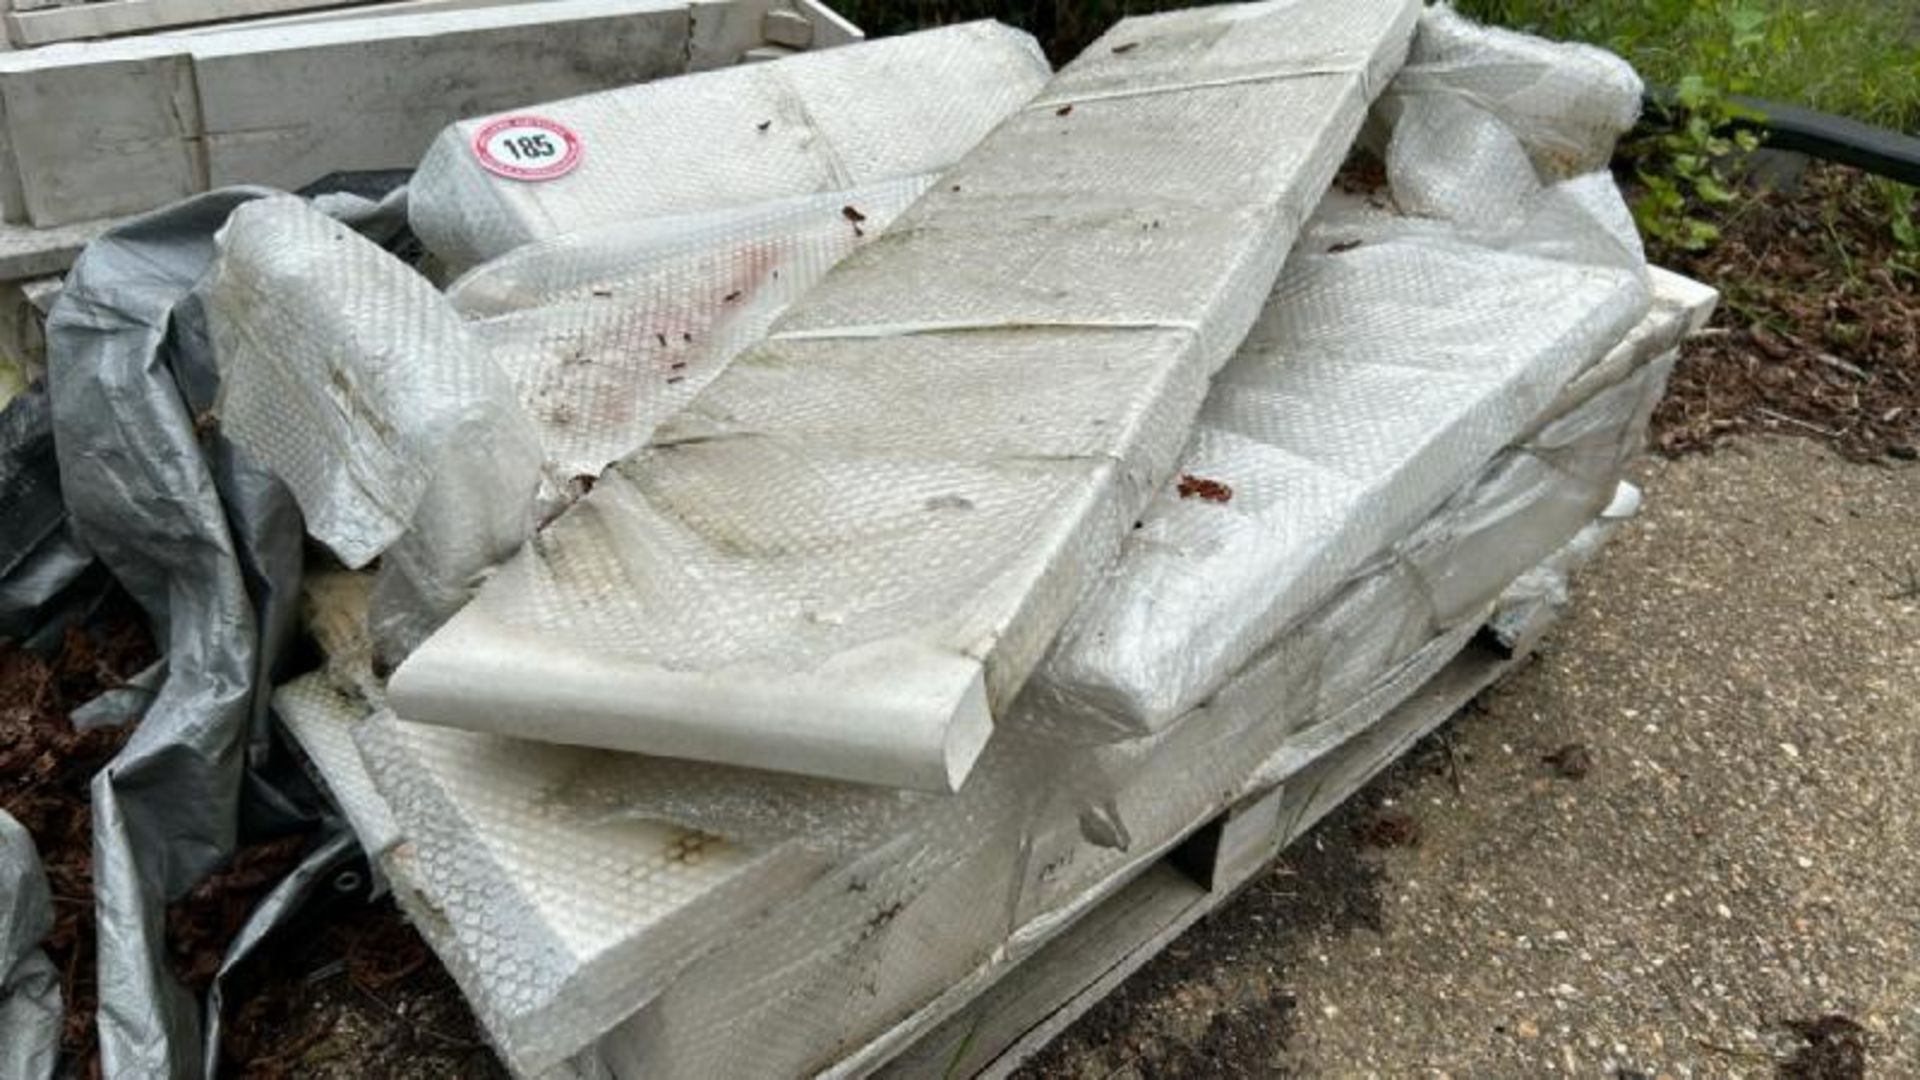 PALLET FULL OF MARBLE FIREPLACE COMPONENTS